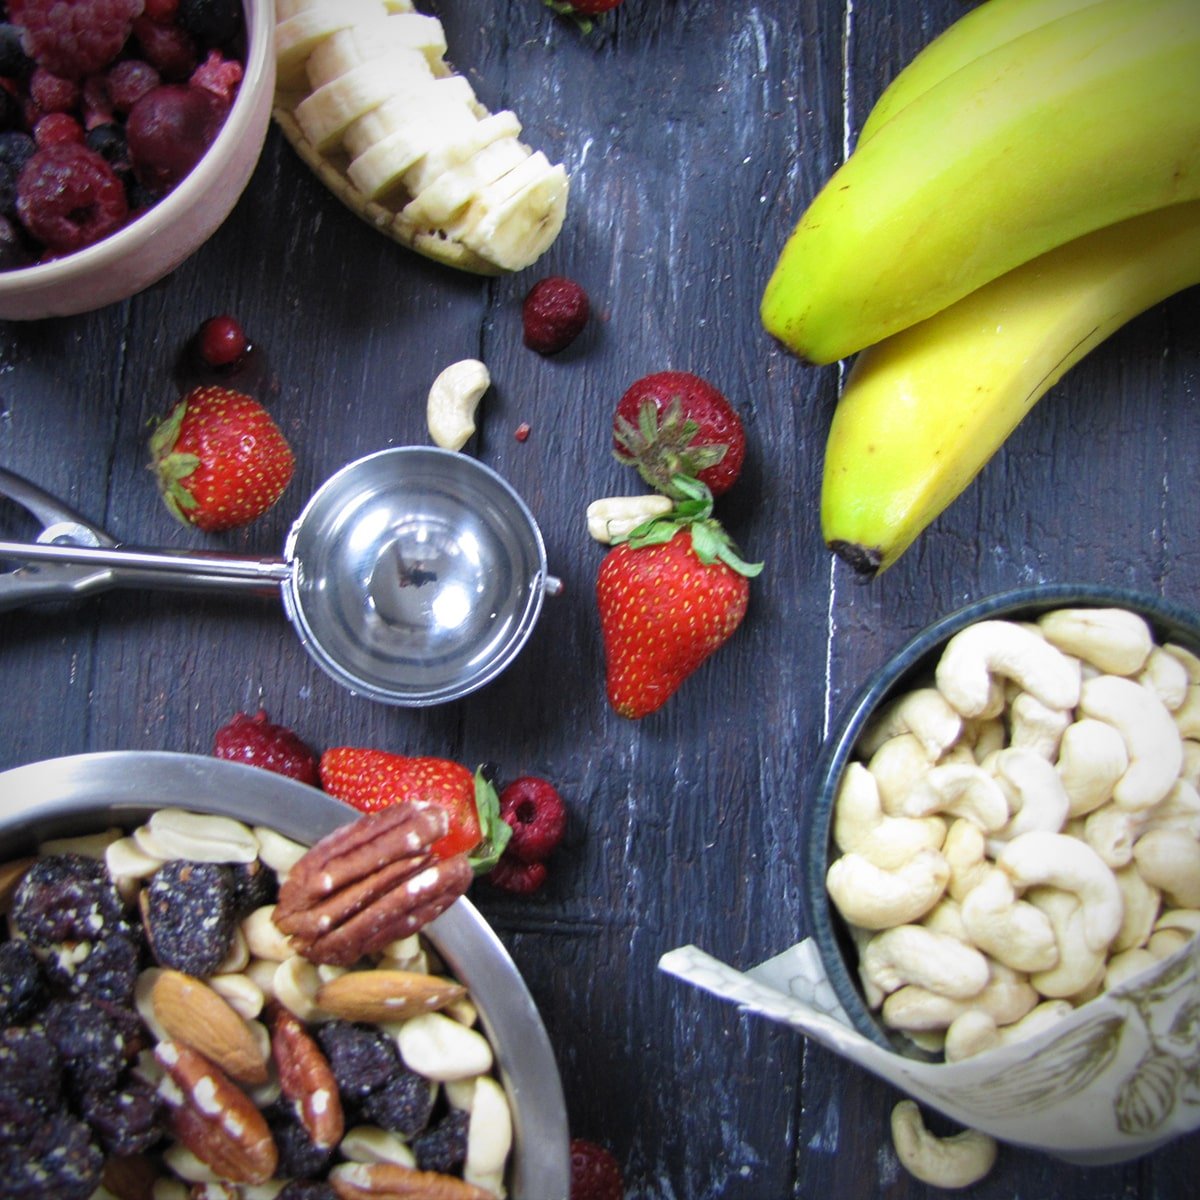 photo showing ice cream scoop, various fruits and nuts to make vegan ice cream 